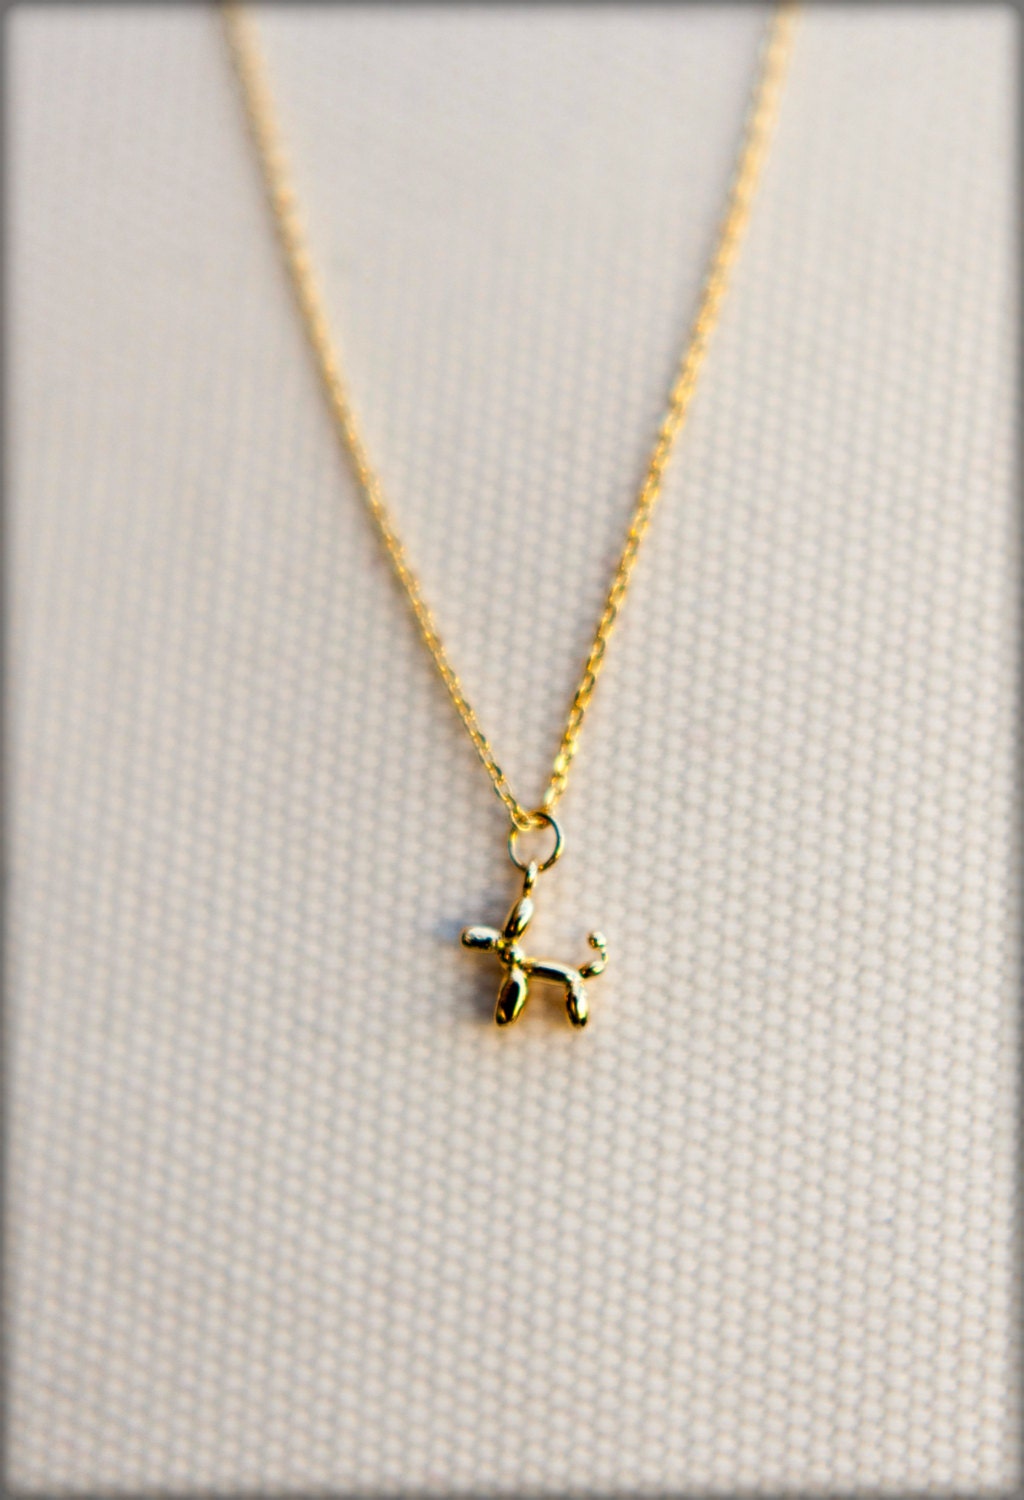 Tiny Balloon Animal Dog Necklace Available in Silver Gold - Etsy